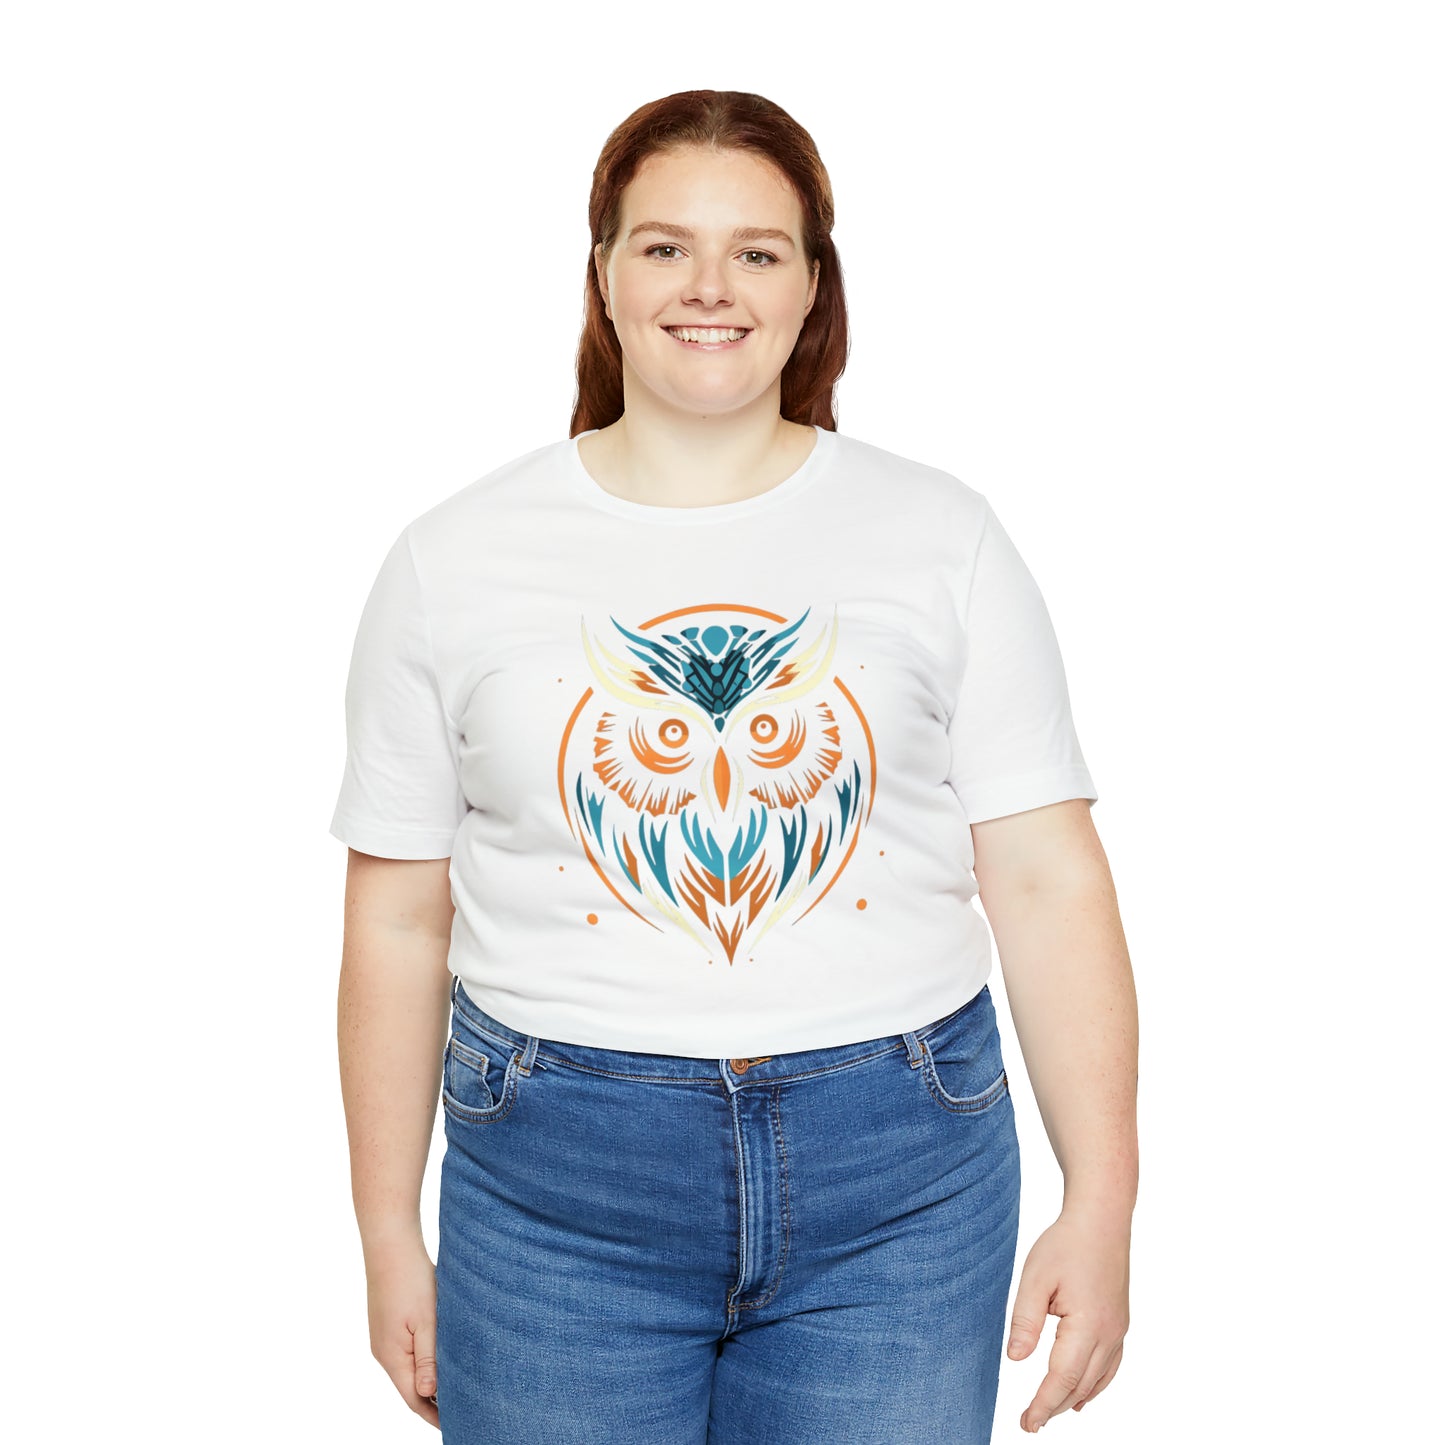 Unisex Jersey Short Sleeve Tee, Patriotic Shirts, Patriotic Shirts and stand up for what you believe in - owl2you